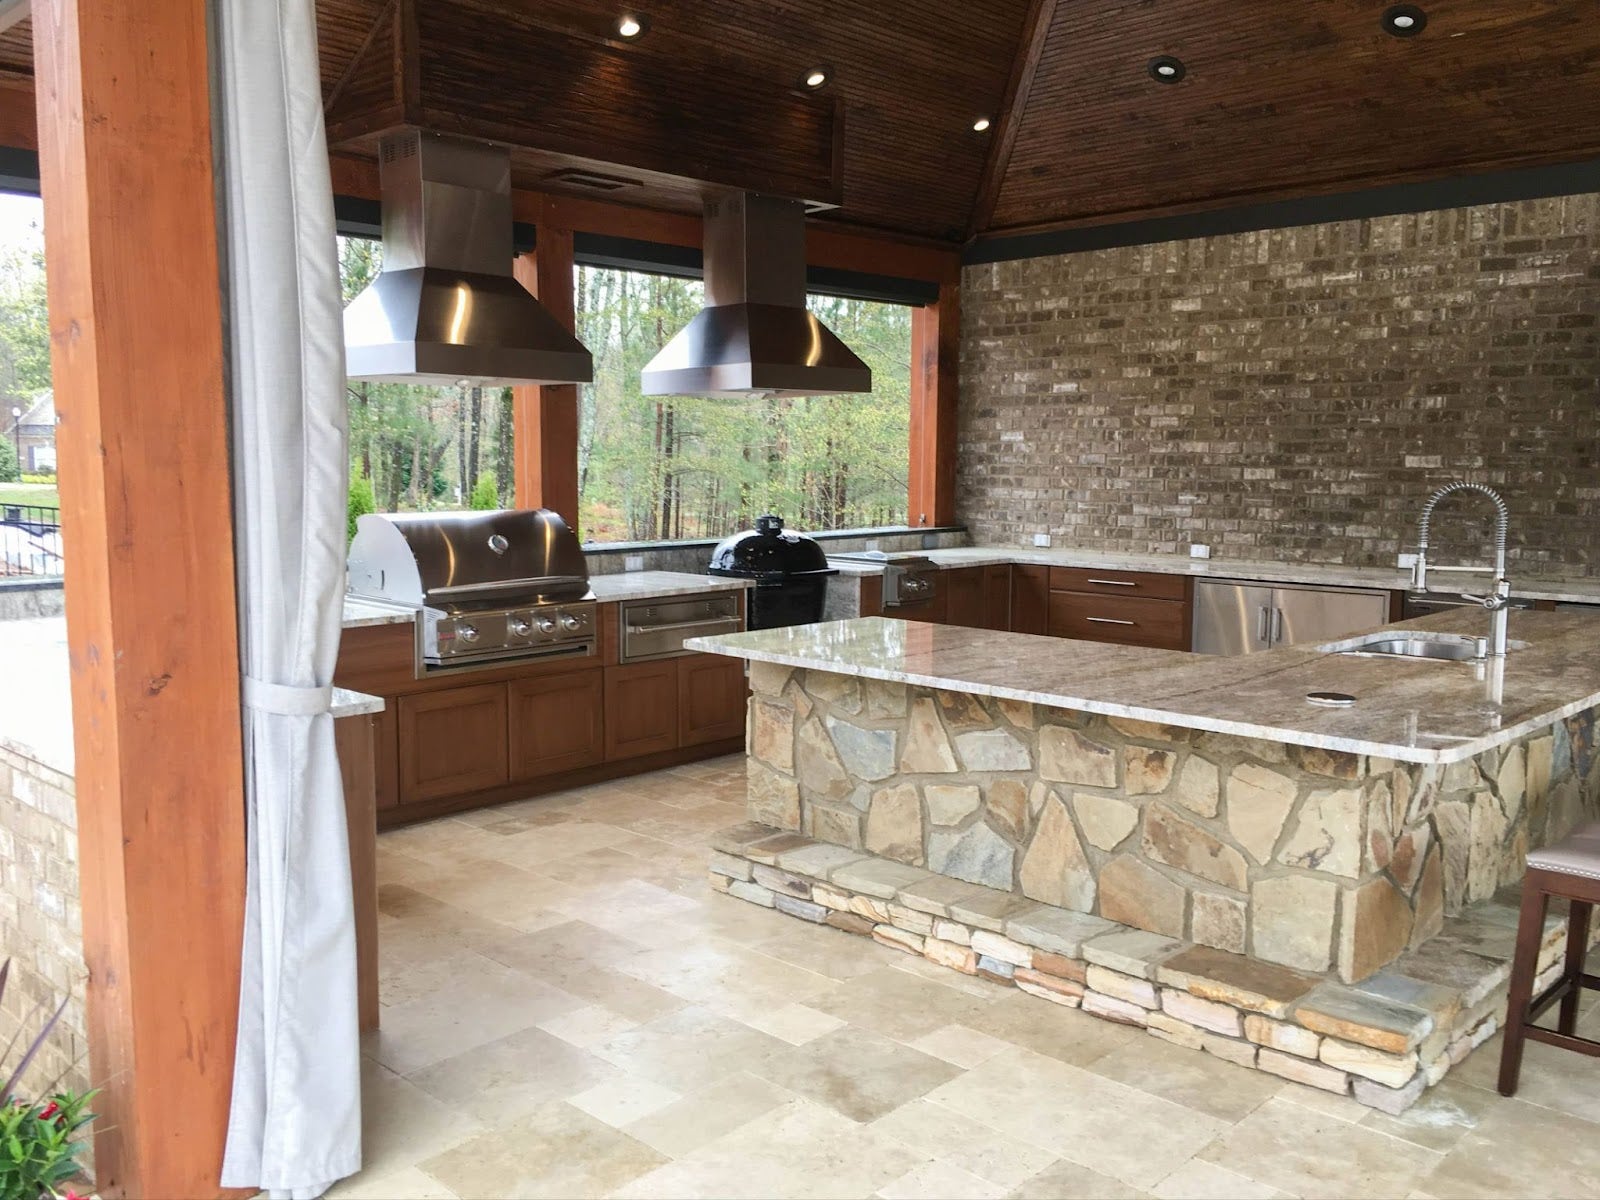 Expansive covered patio with a deluxe cooking area, including a grill and smoker under vent hoods, set against a brick wall with scenic views of nature.